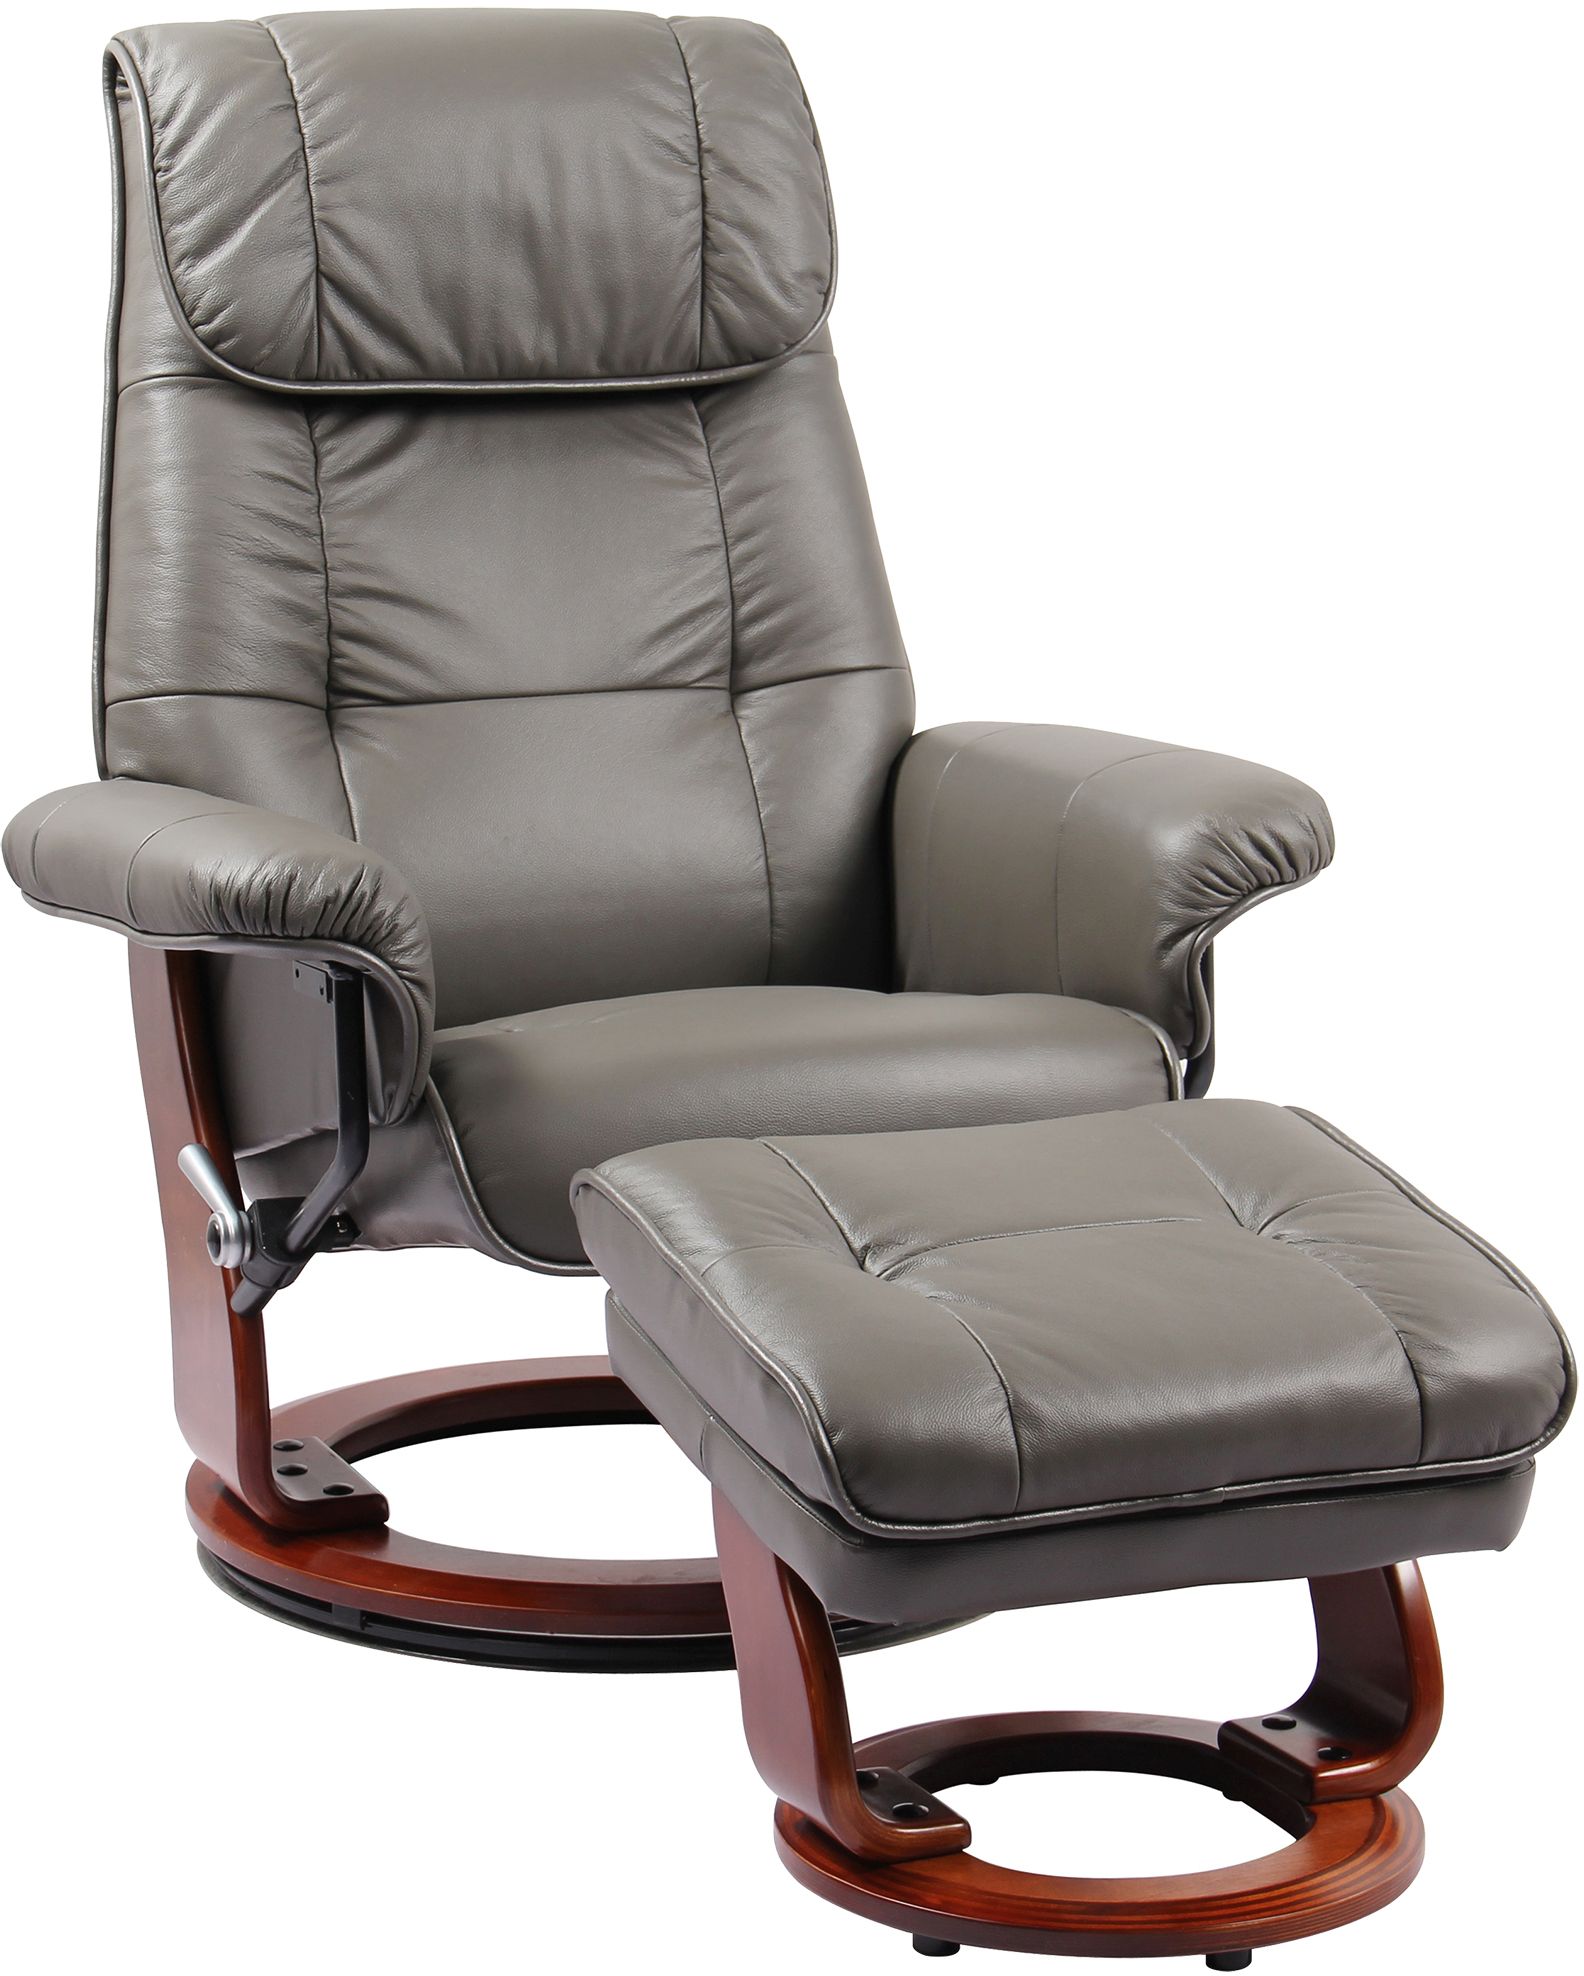 BenchMaster Trend Line Emmie II Chair and Ottoman